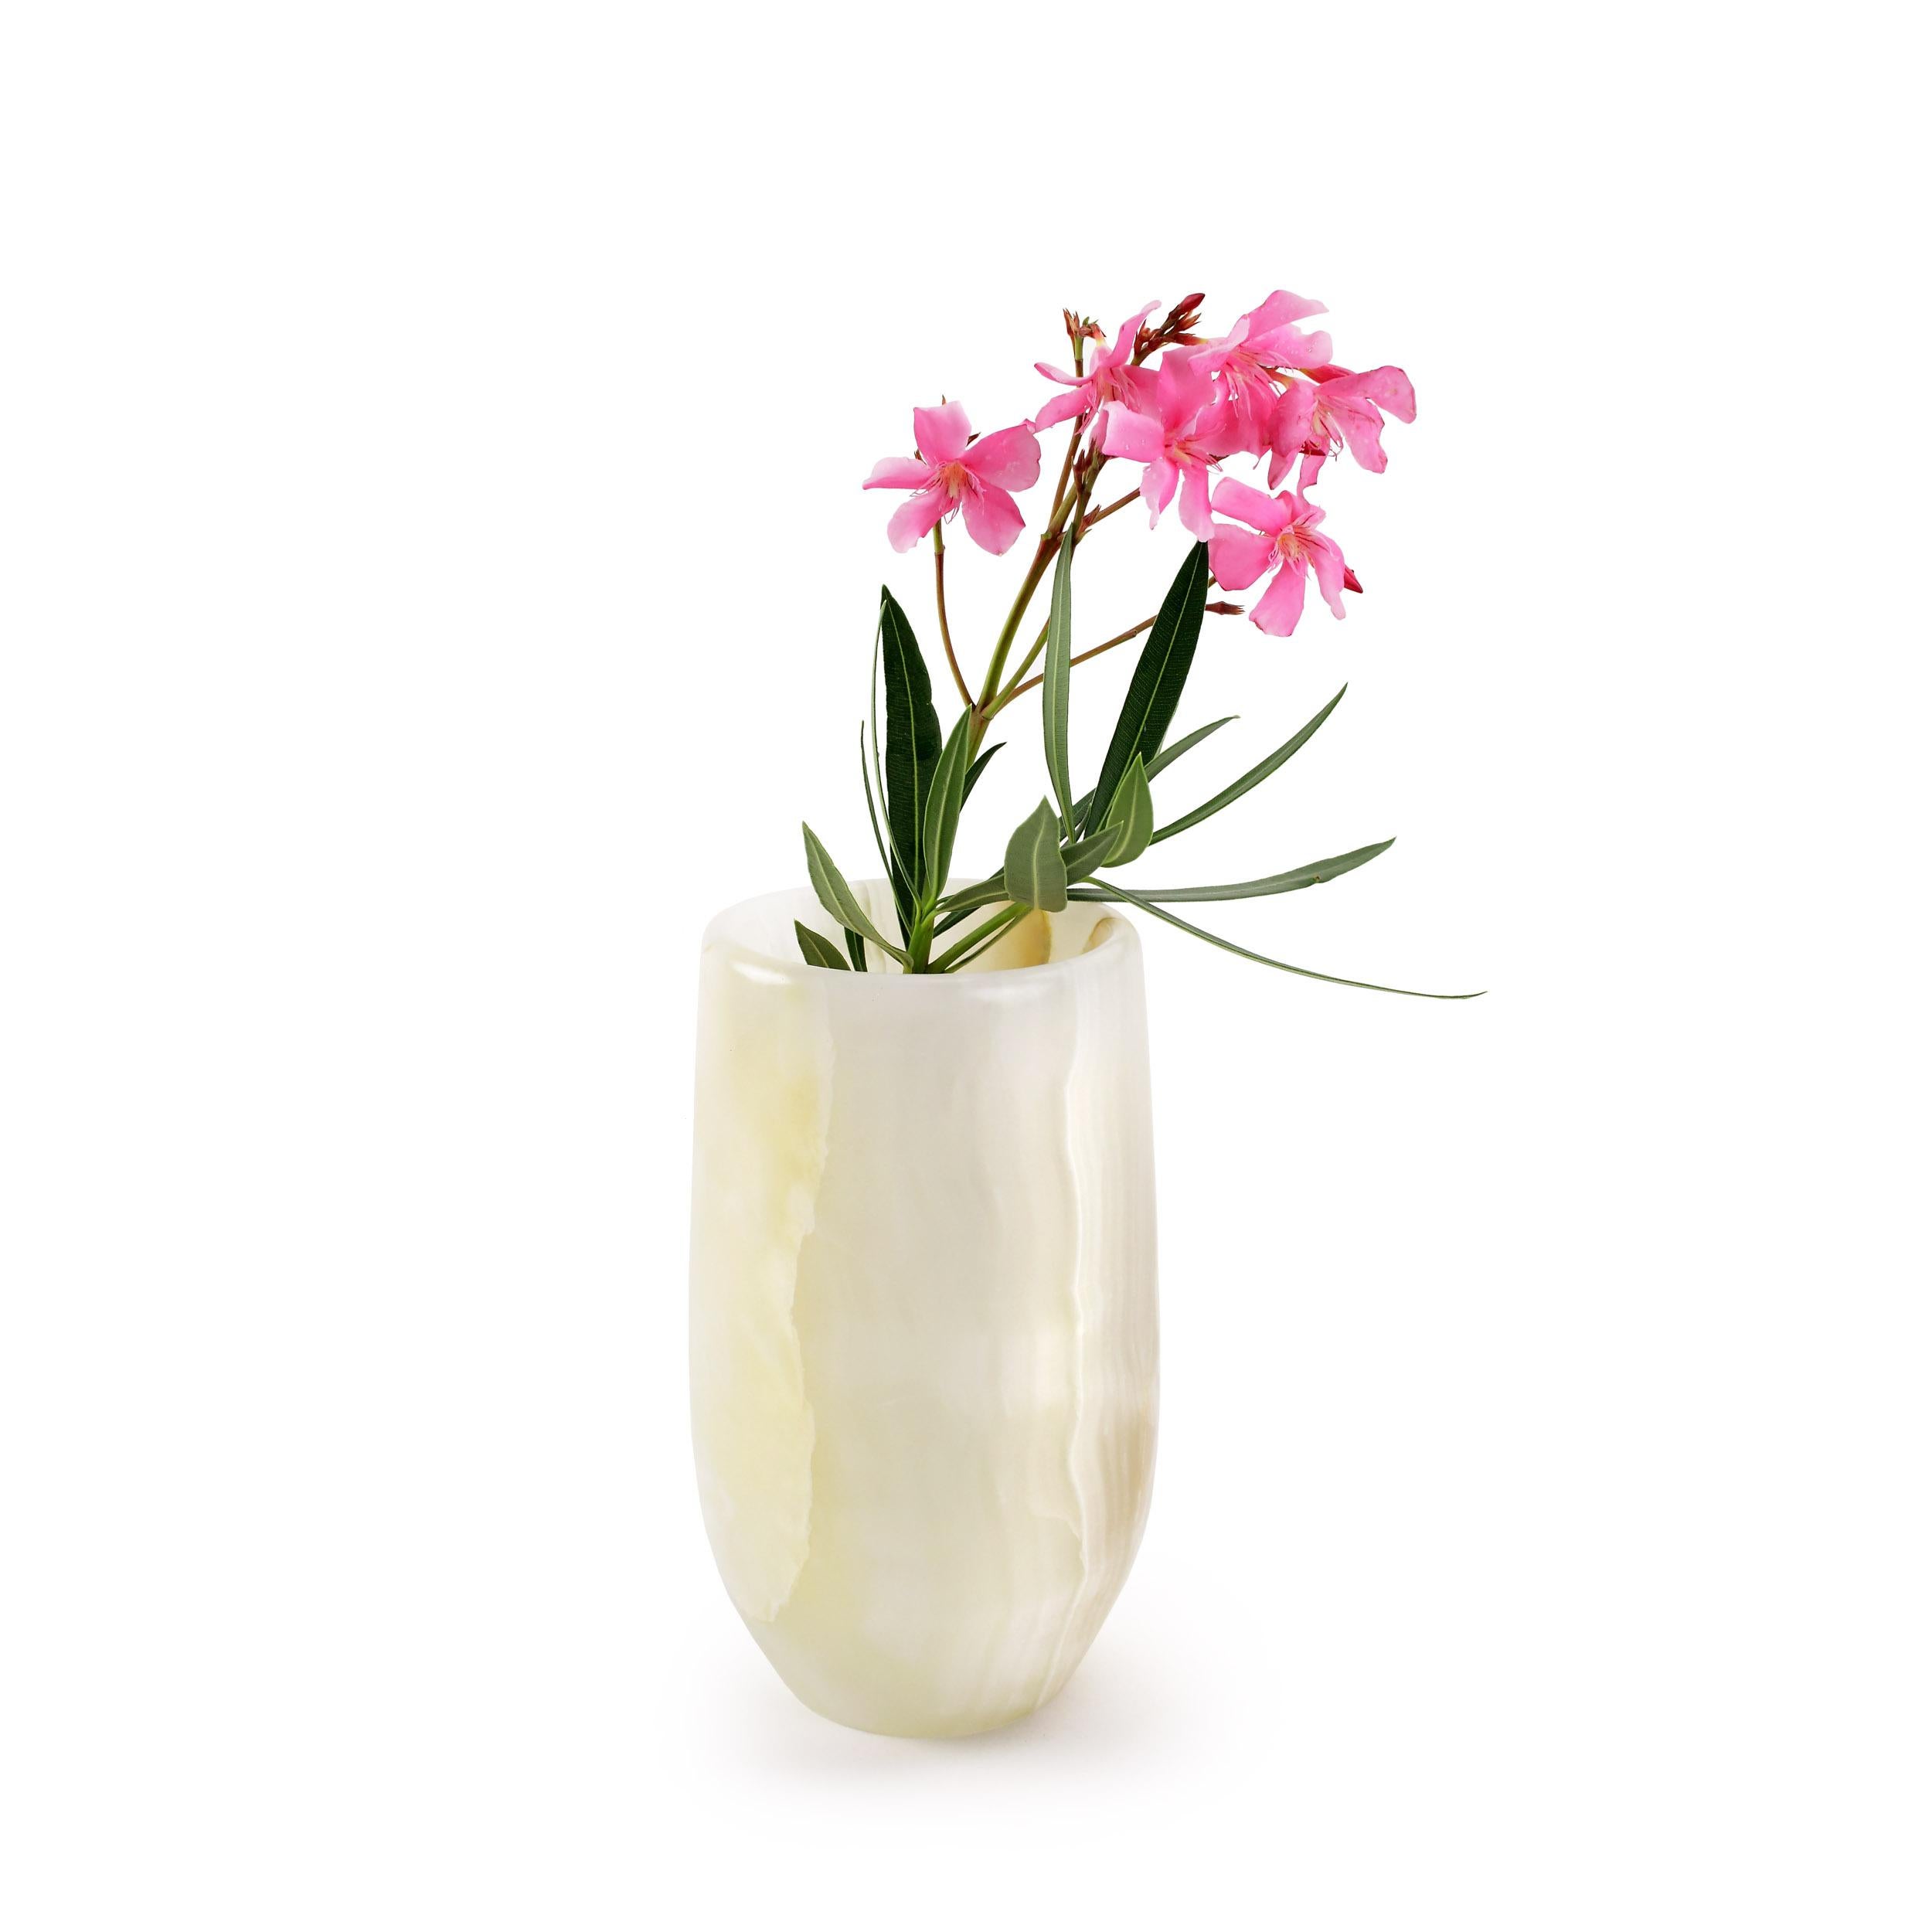 Luxurious small vase sculpted by hand from a solid block of white onyx. 

Vase dimensions: D 13, H 22 cm. The polished finishing underlines the transparency of the onyx making this a very precious object.
Available in different marbles, onyx and